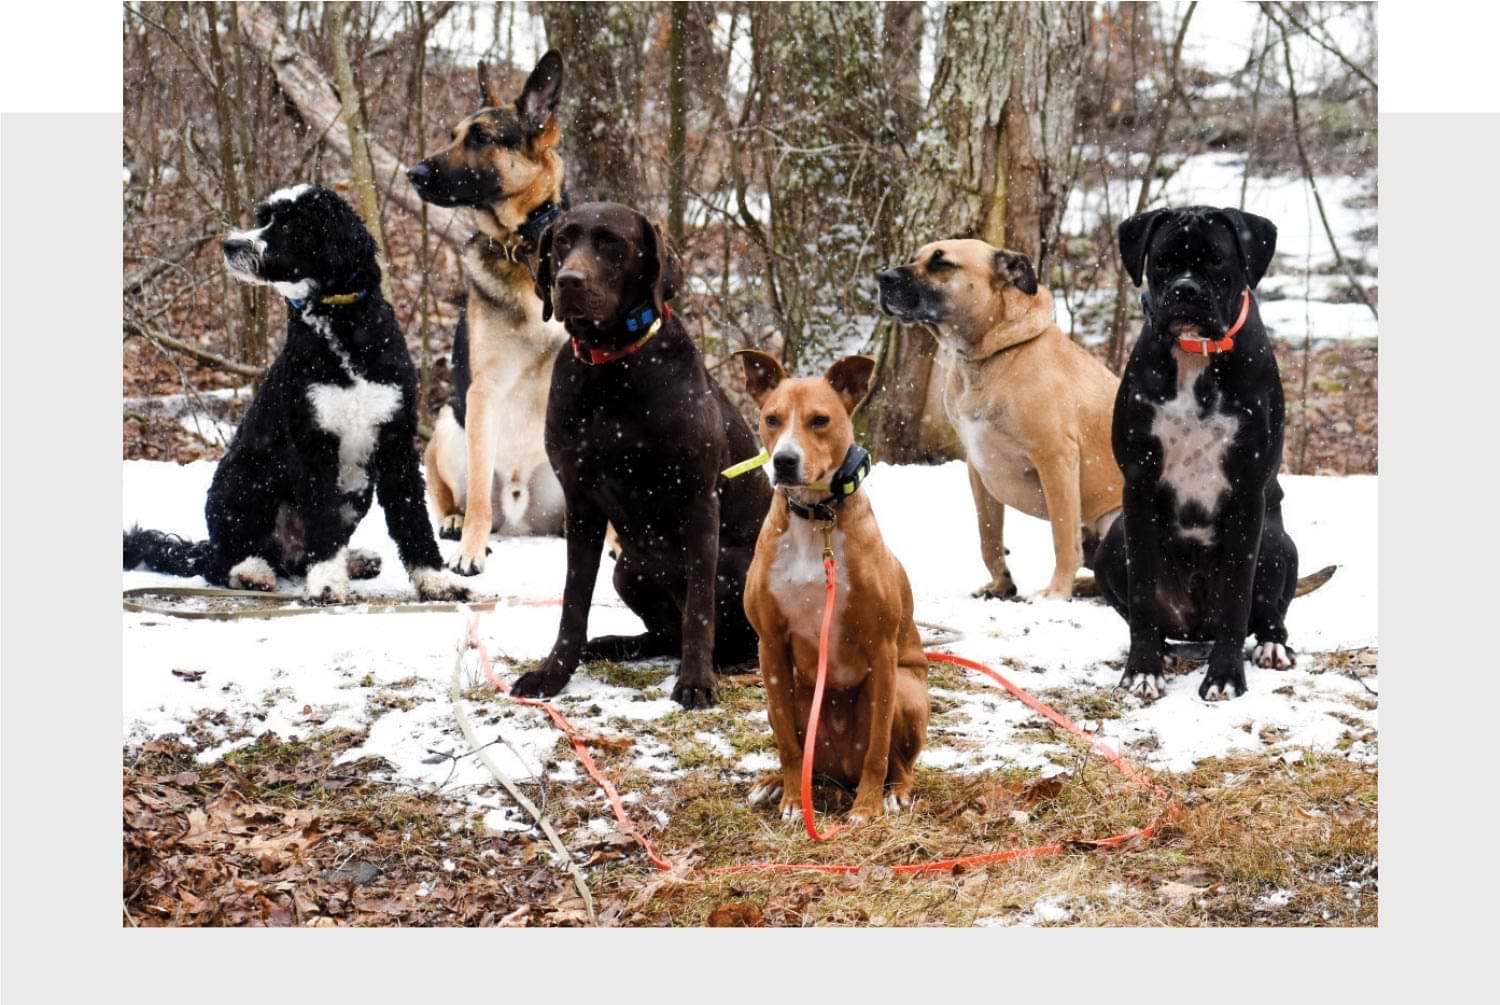 six large dogs of various breeds sit obediently together in the snow